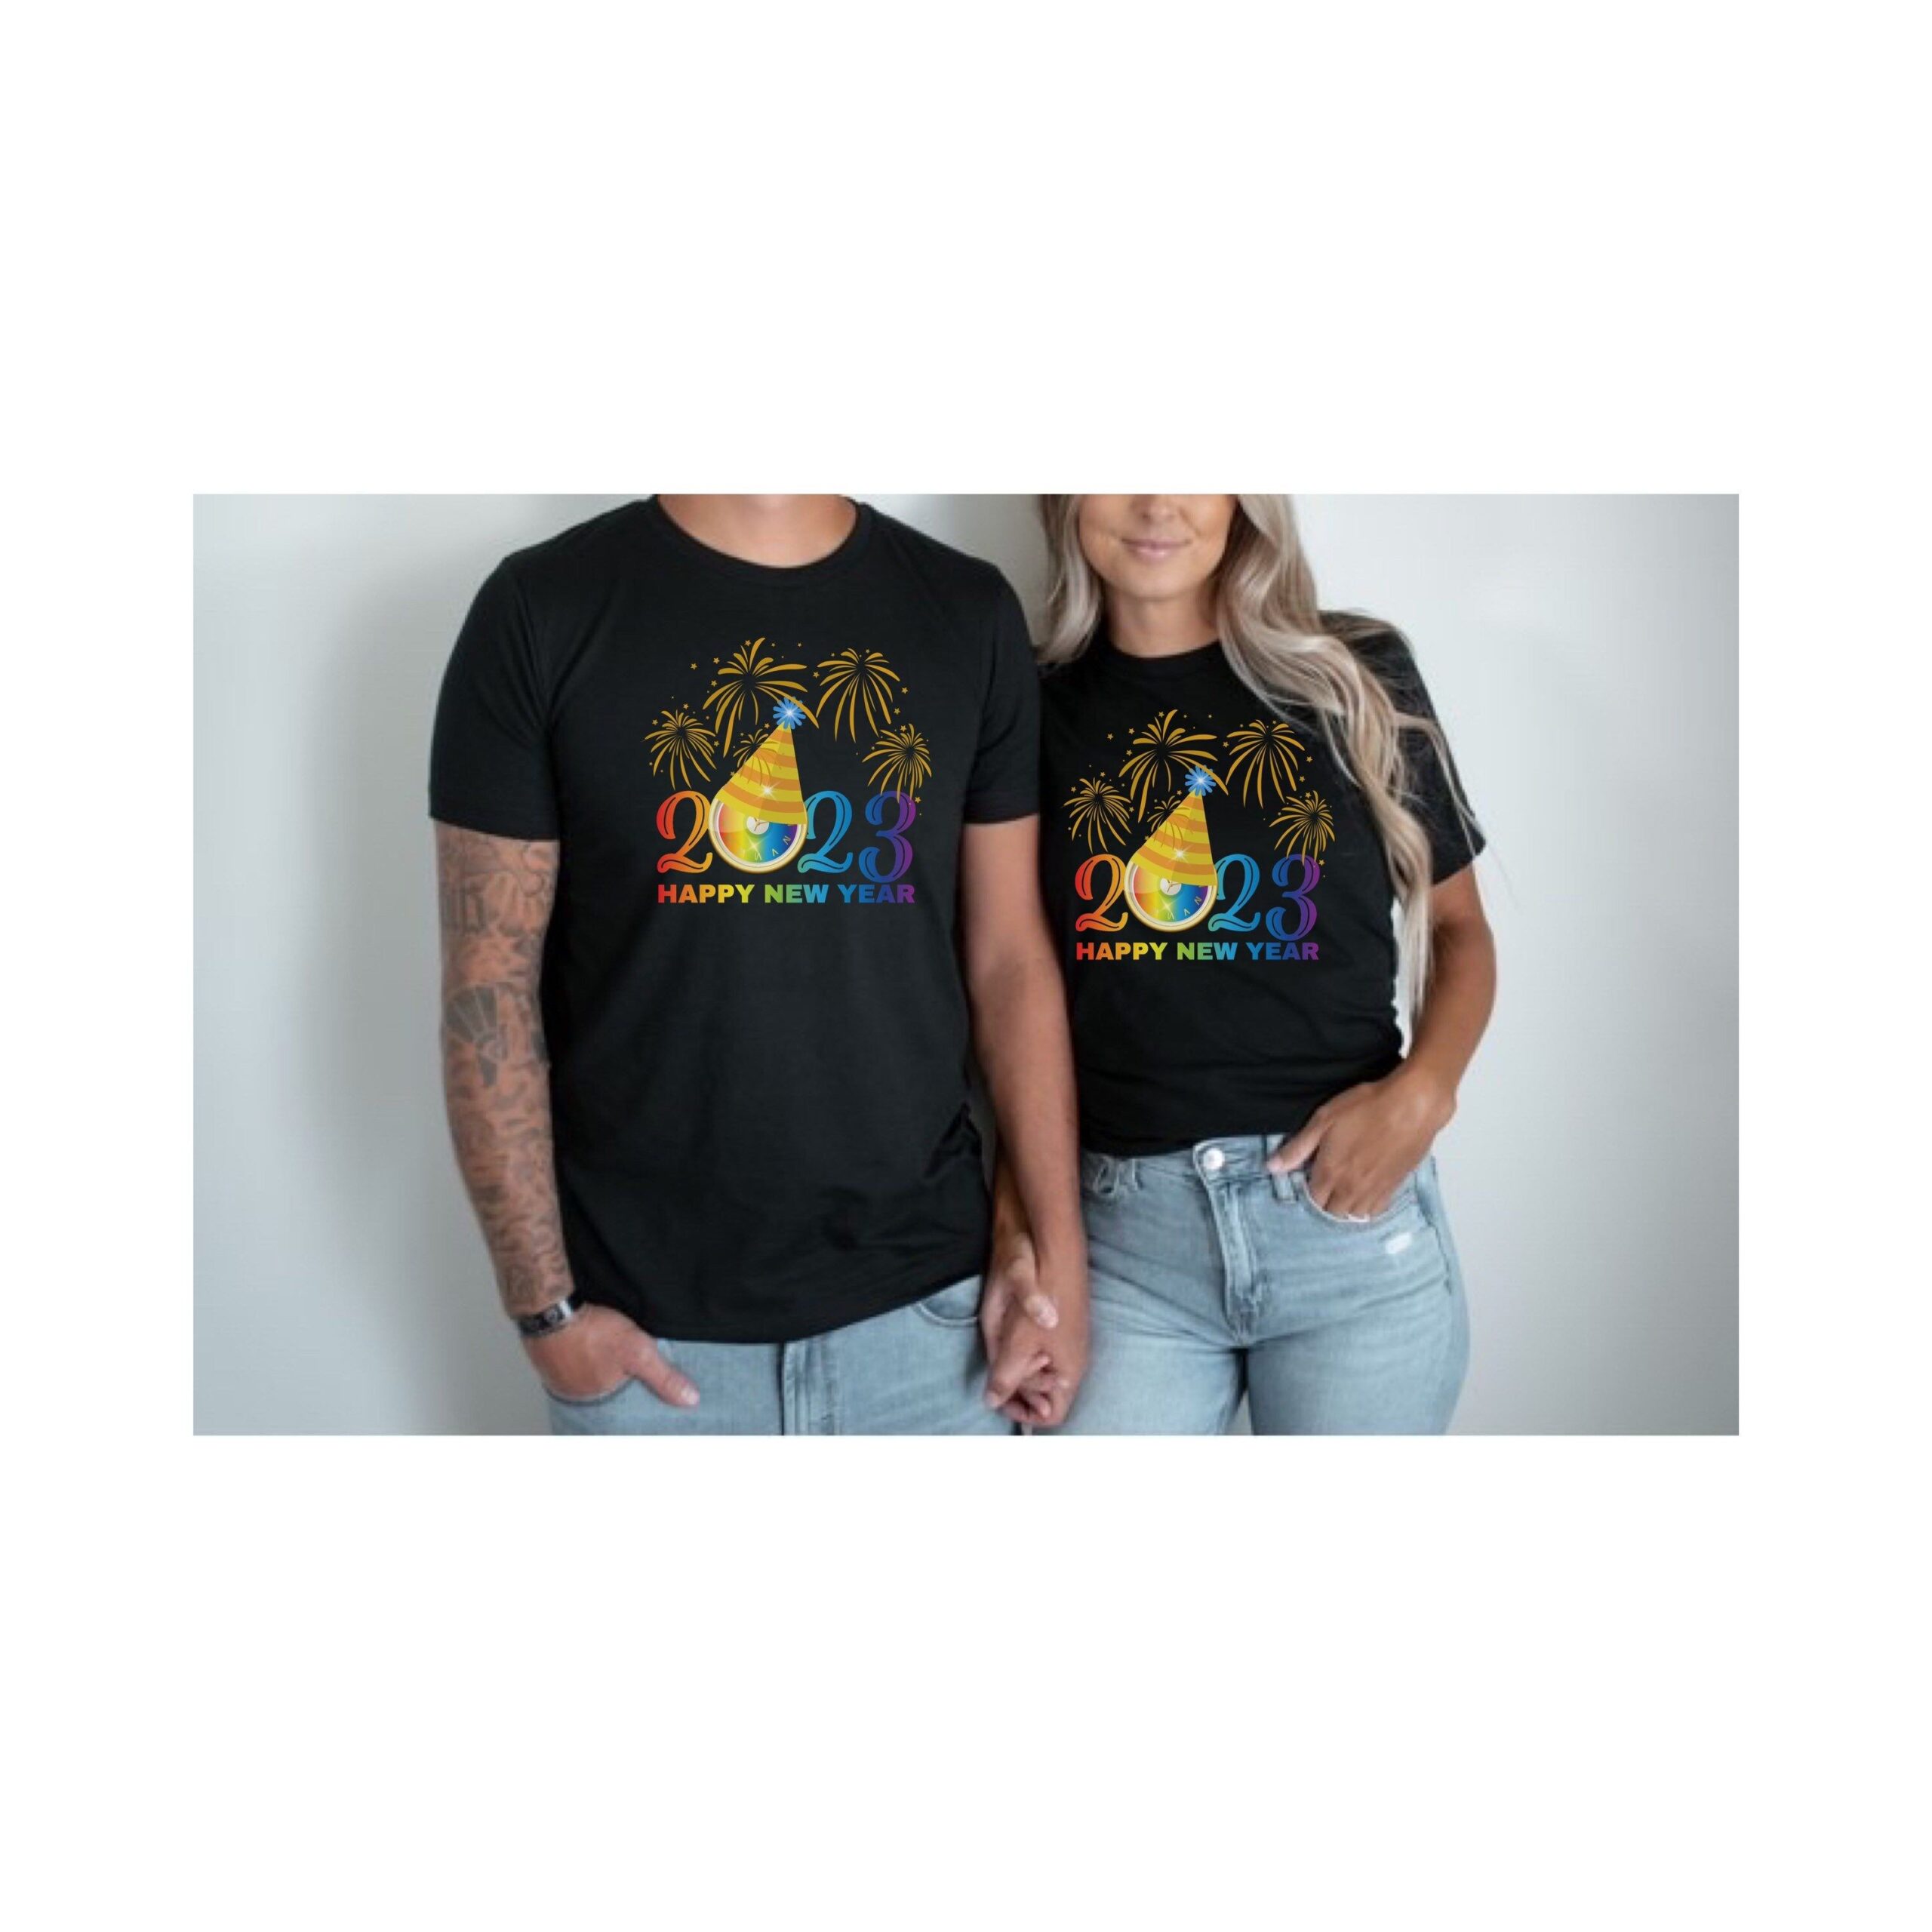 Couples New Year Shirt, , Happy New Year Shirt, Colorful